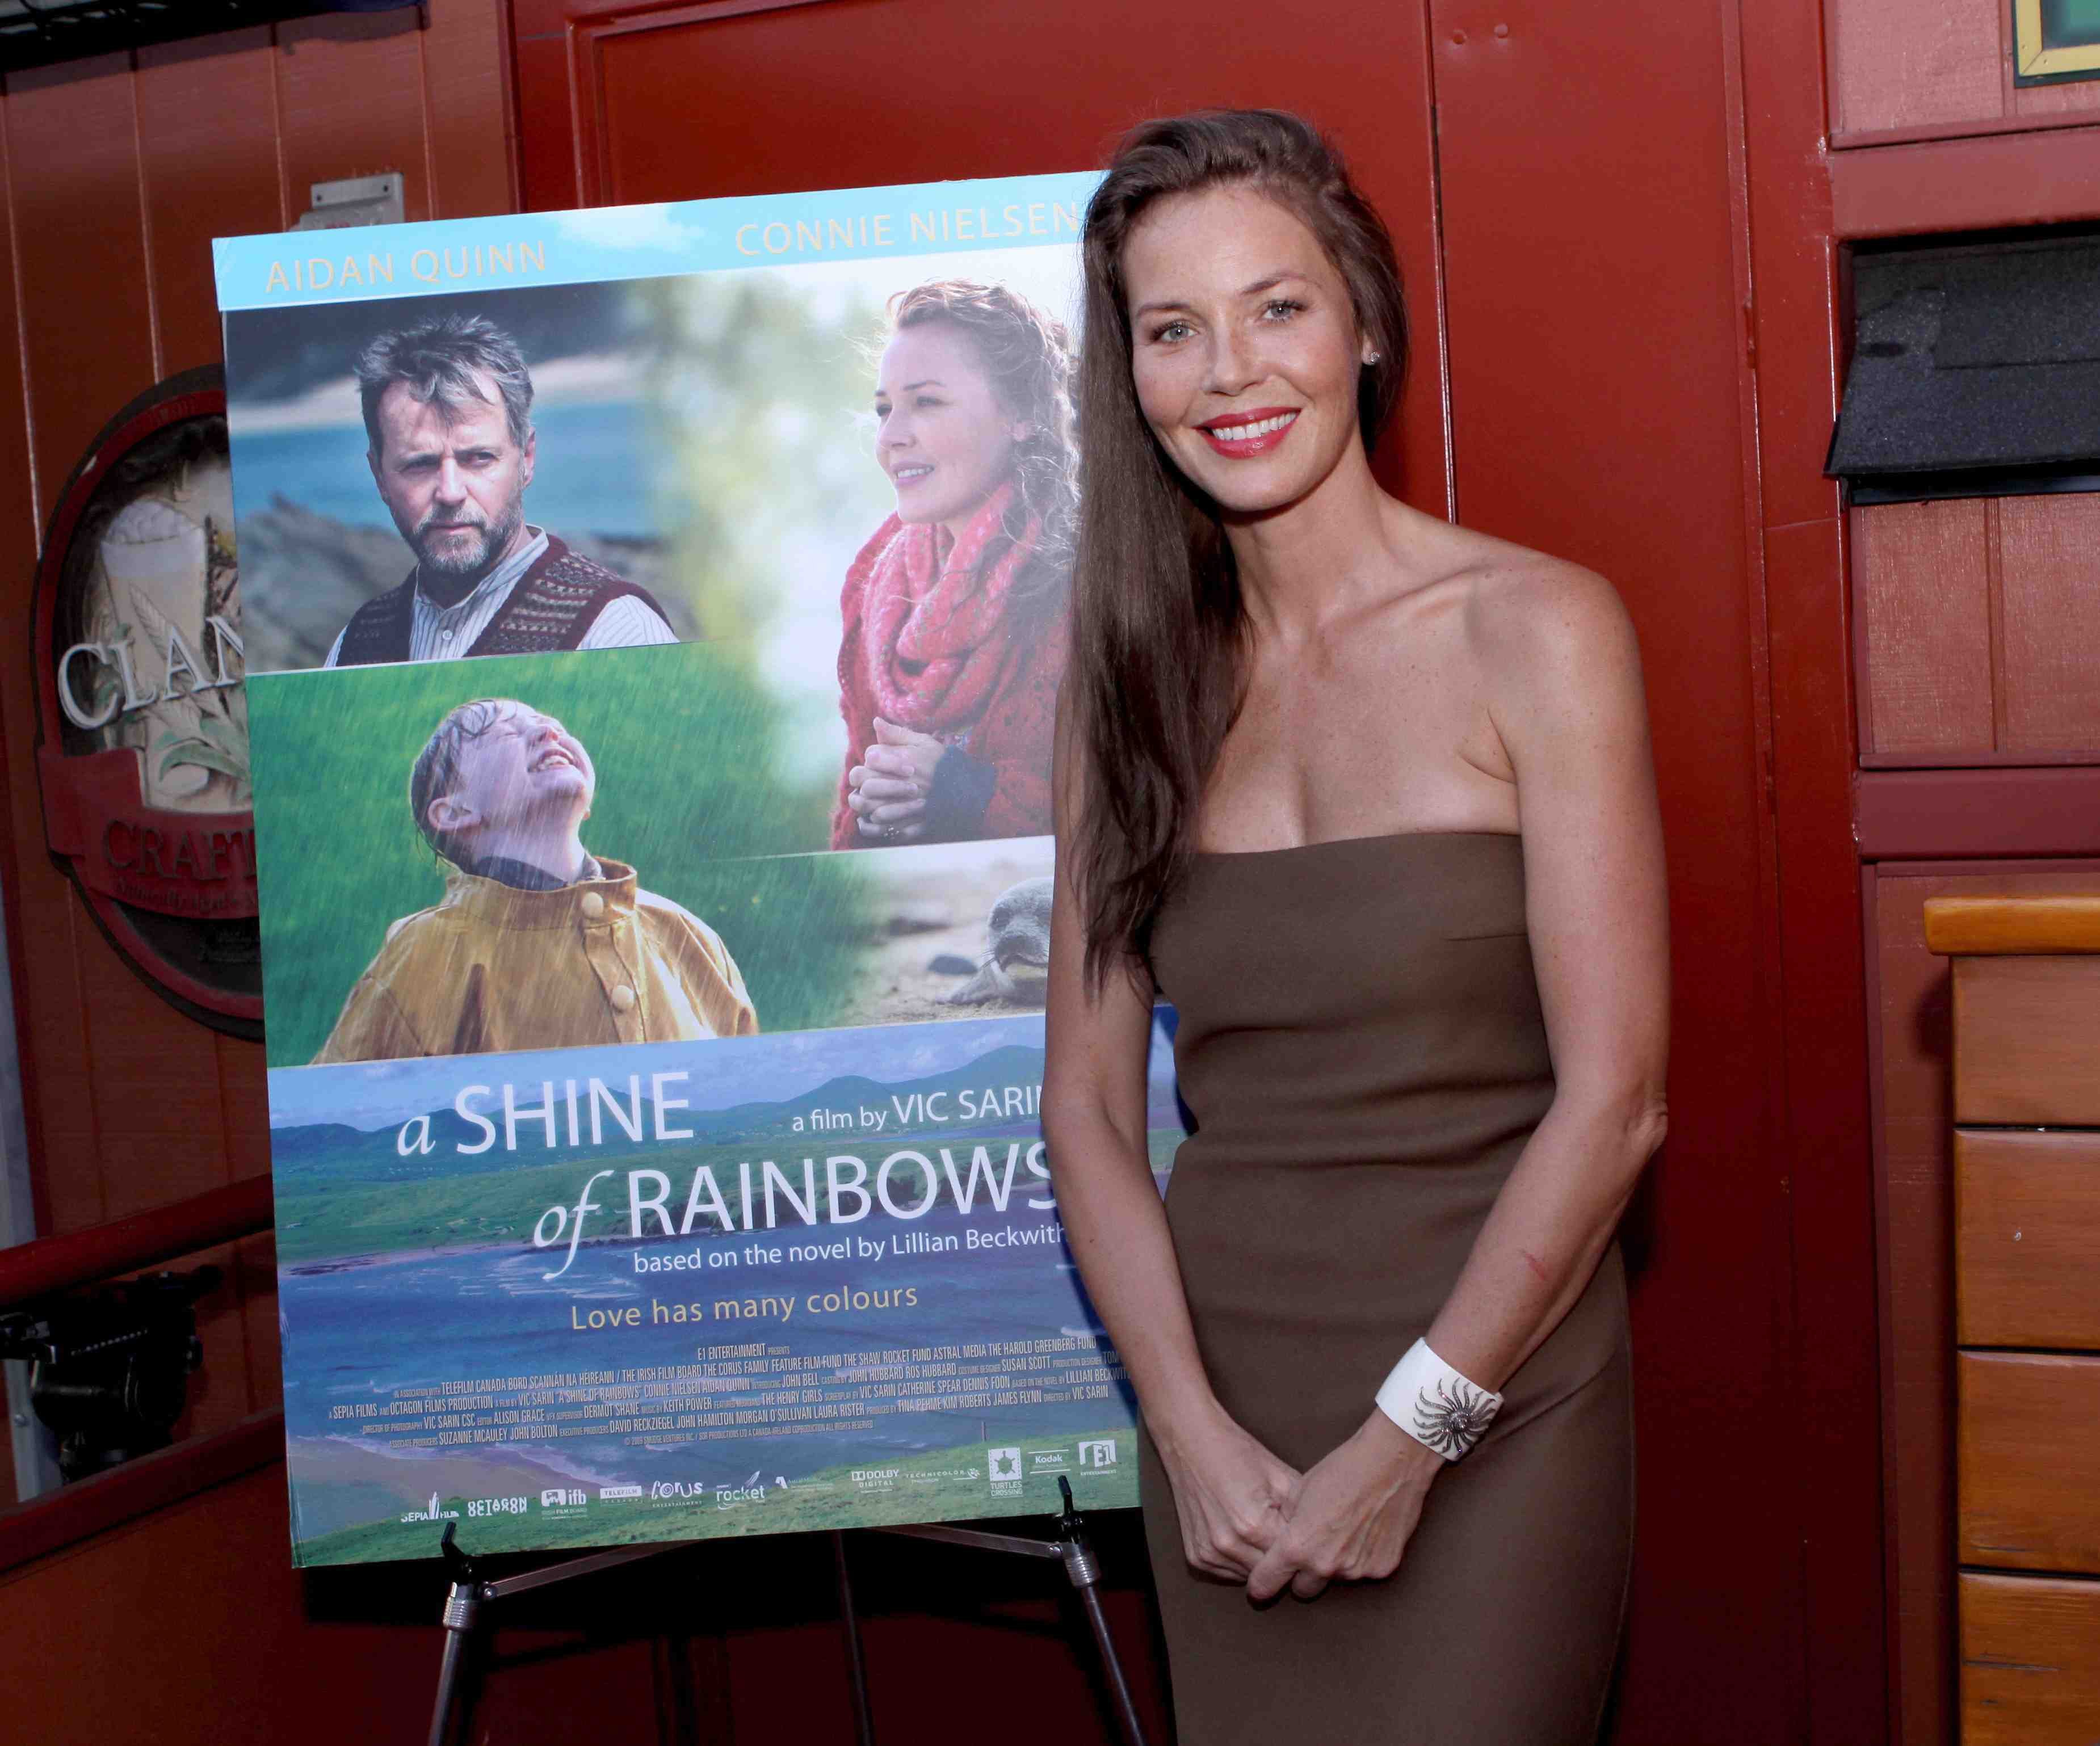 Connie Nielsen in A Shine of Rainbows (2009)